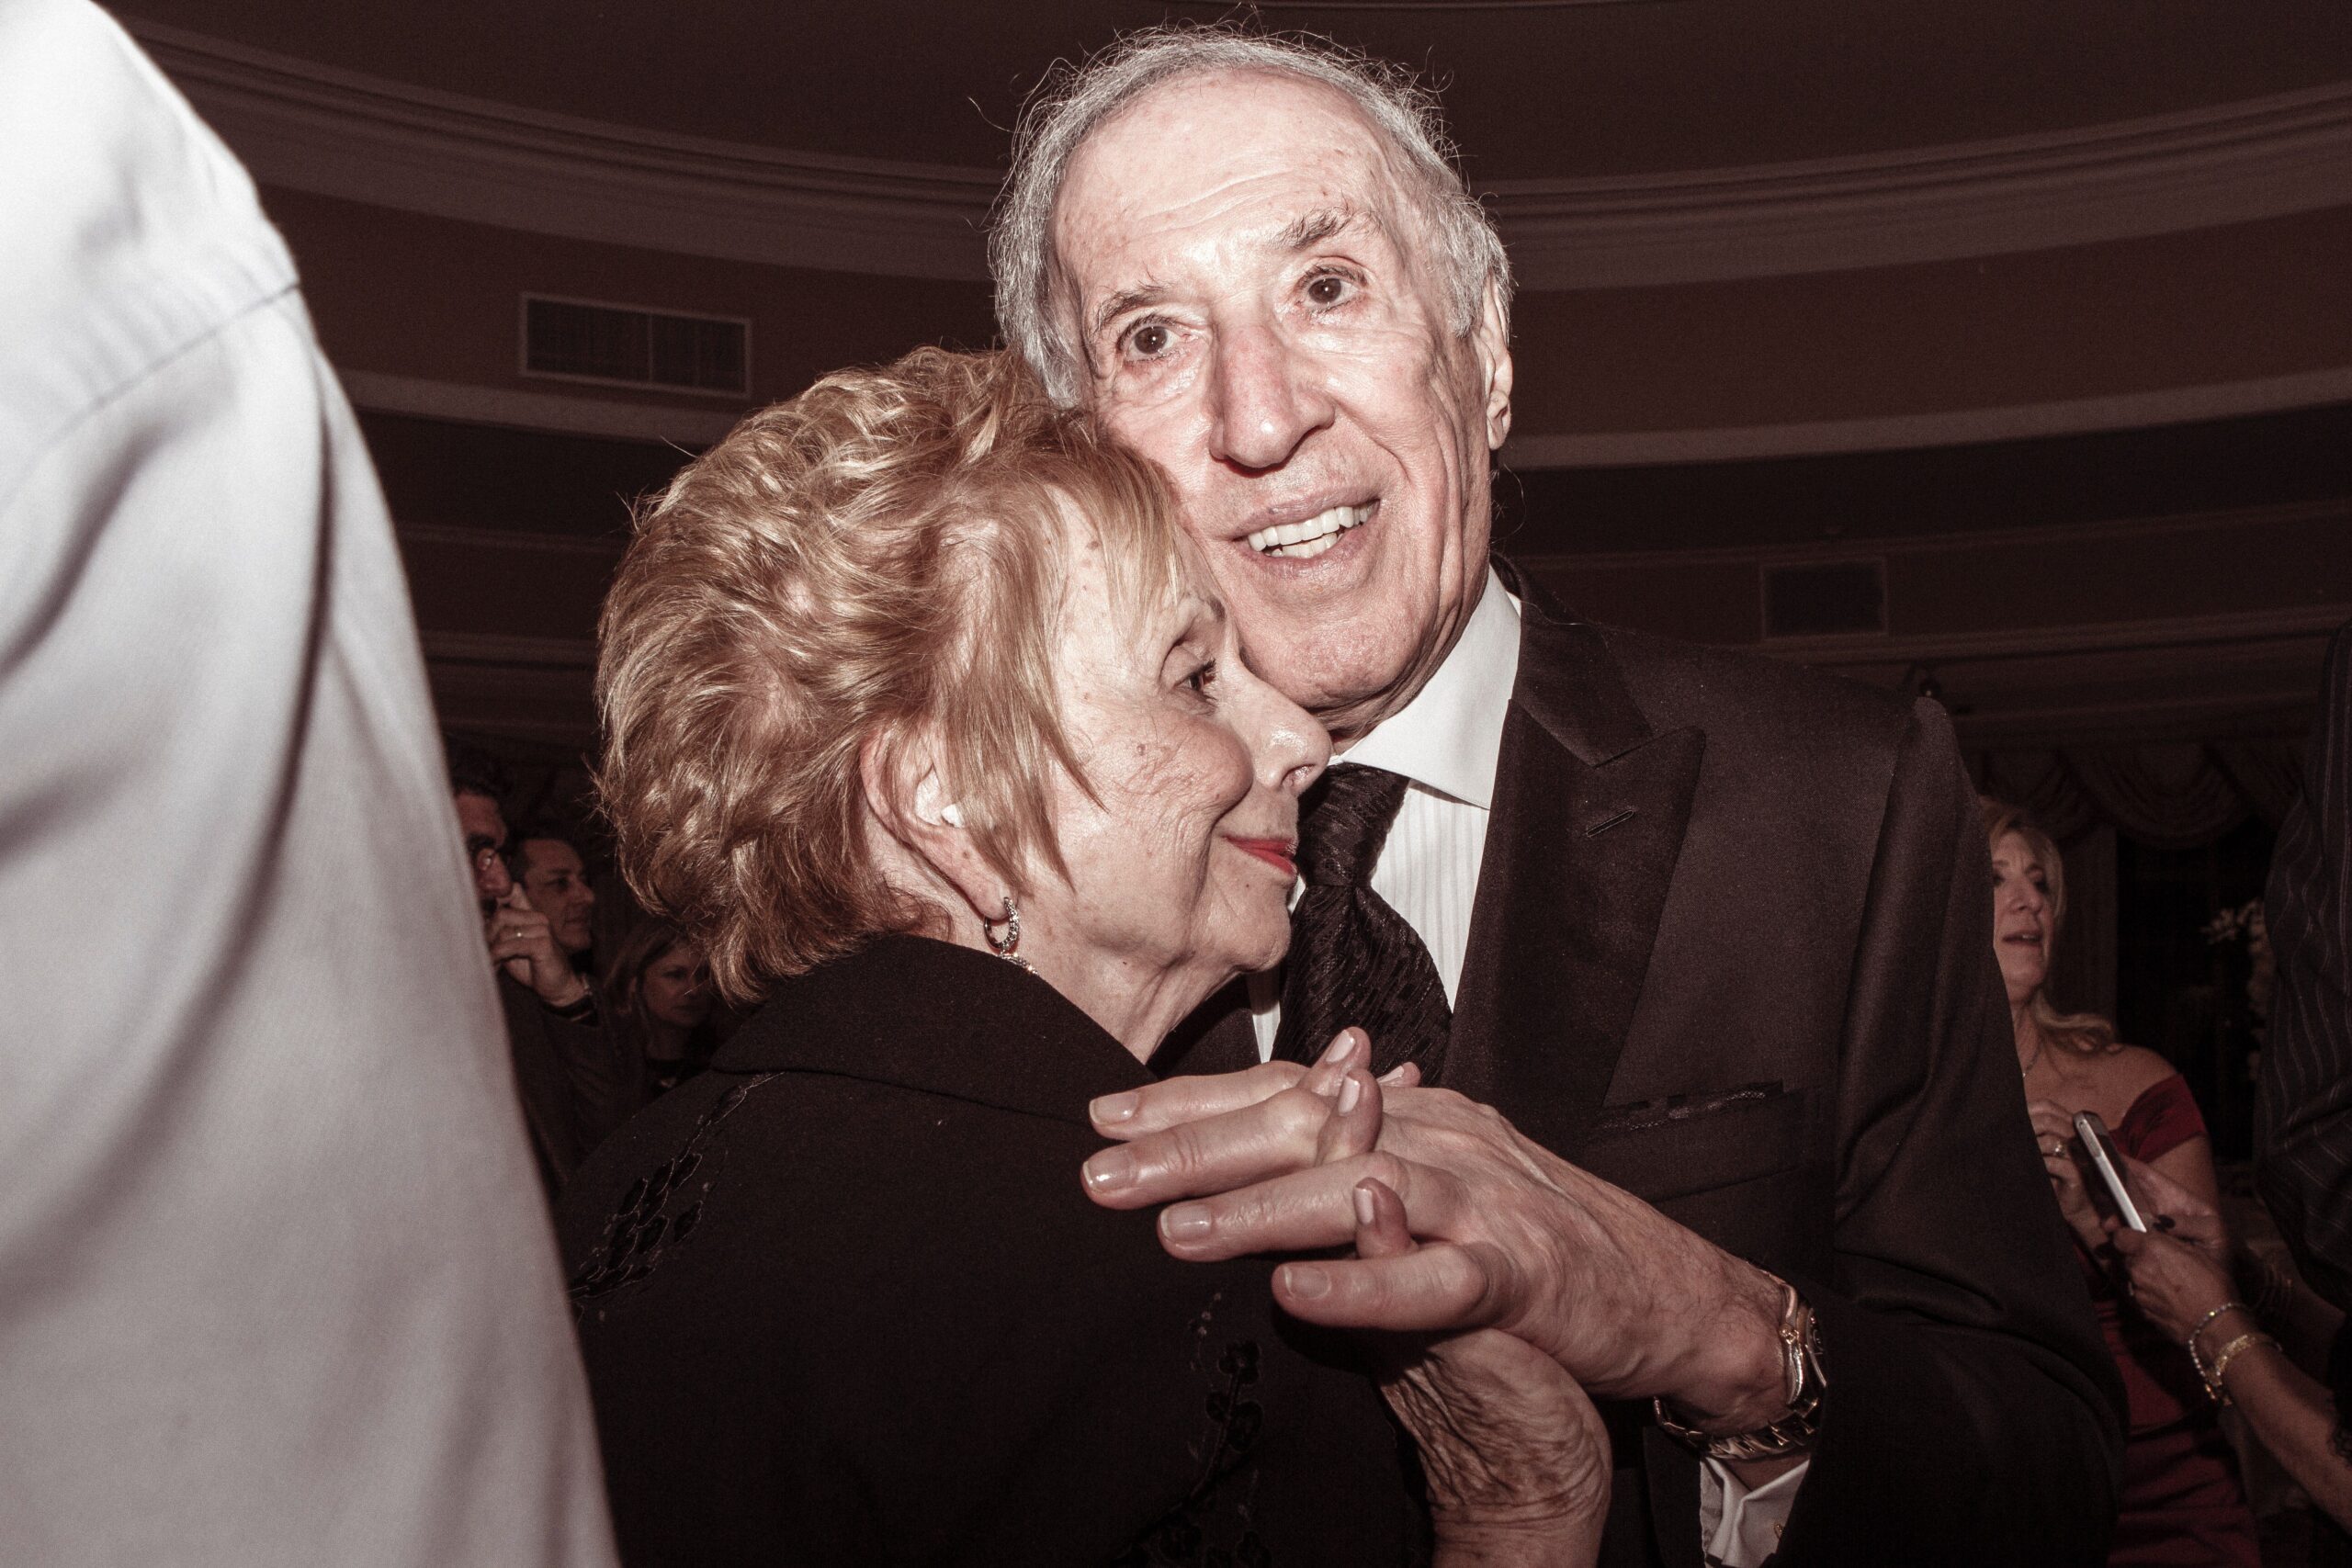 Older couple dancing together while holding hands and smiling